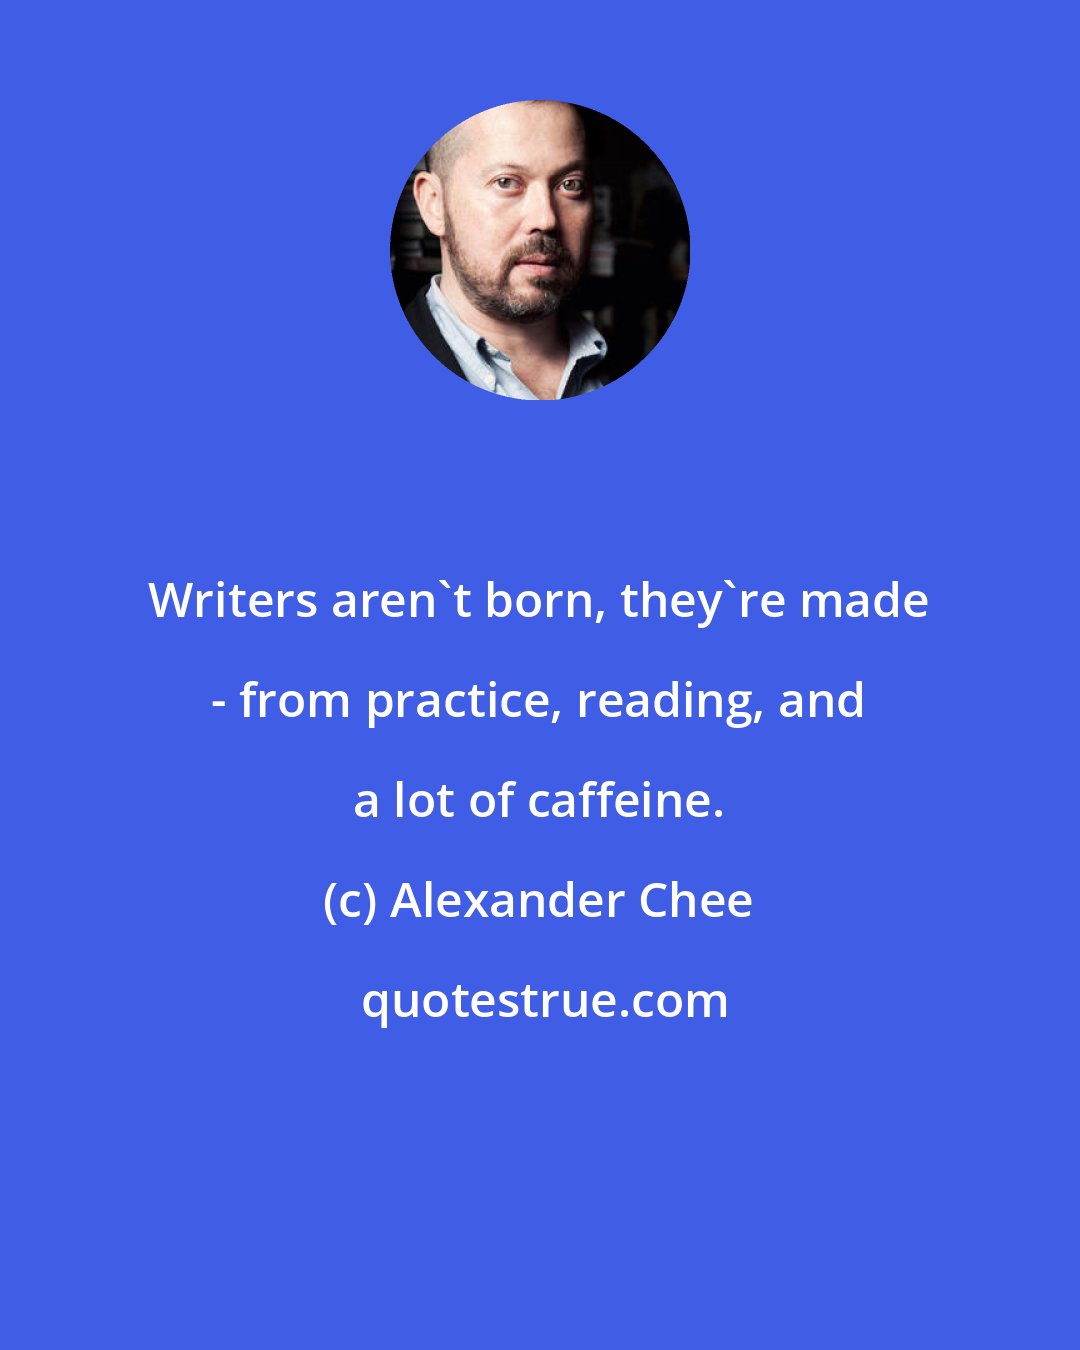 Alexander Chee: Writers aren't born, they're made - from practice, reading, and a lot of caffeine.